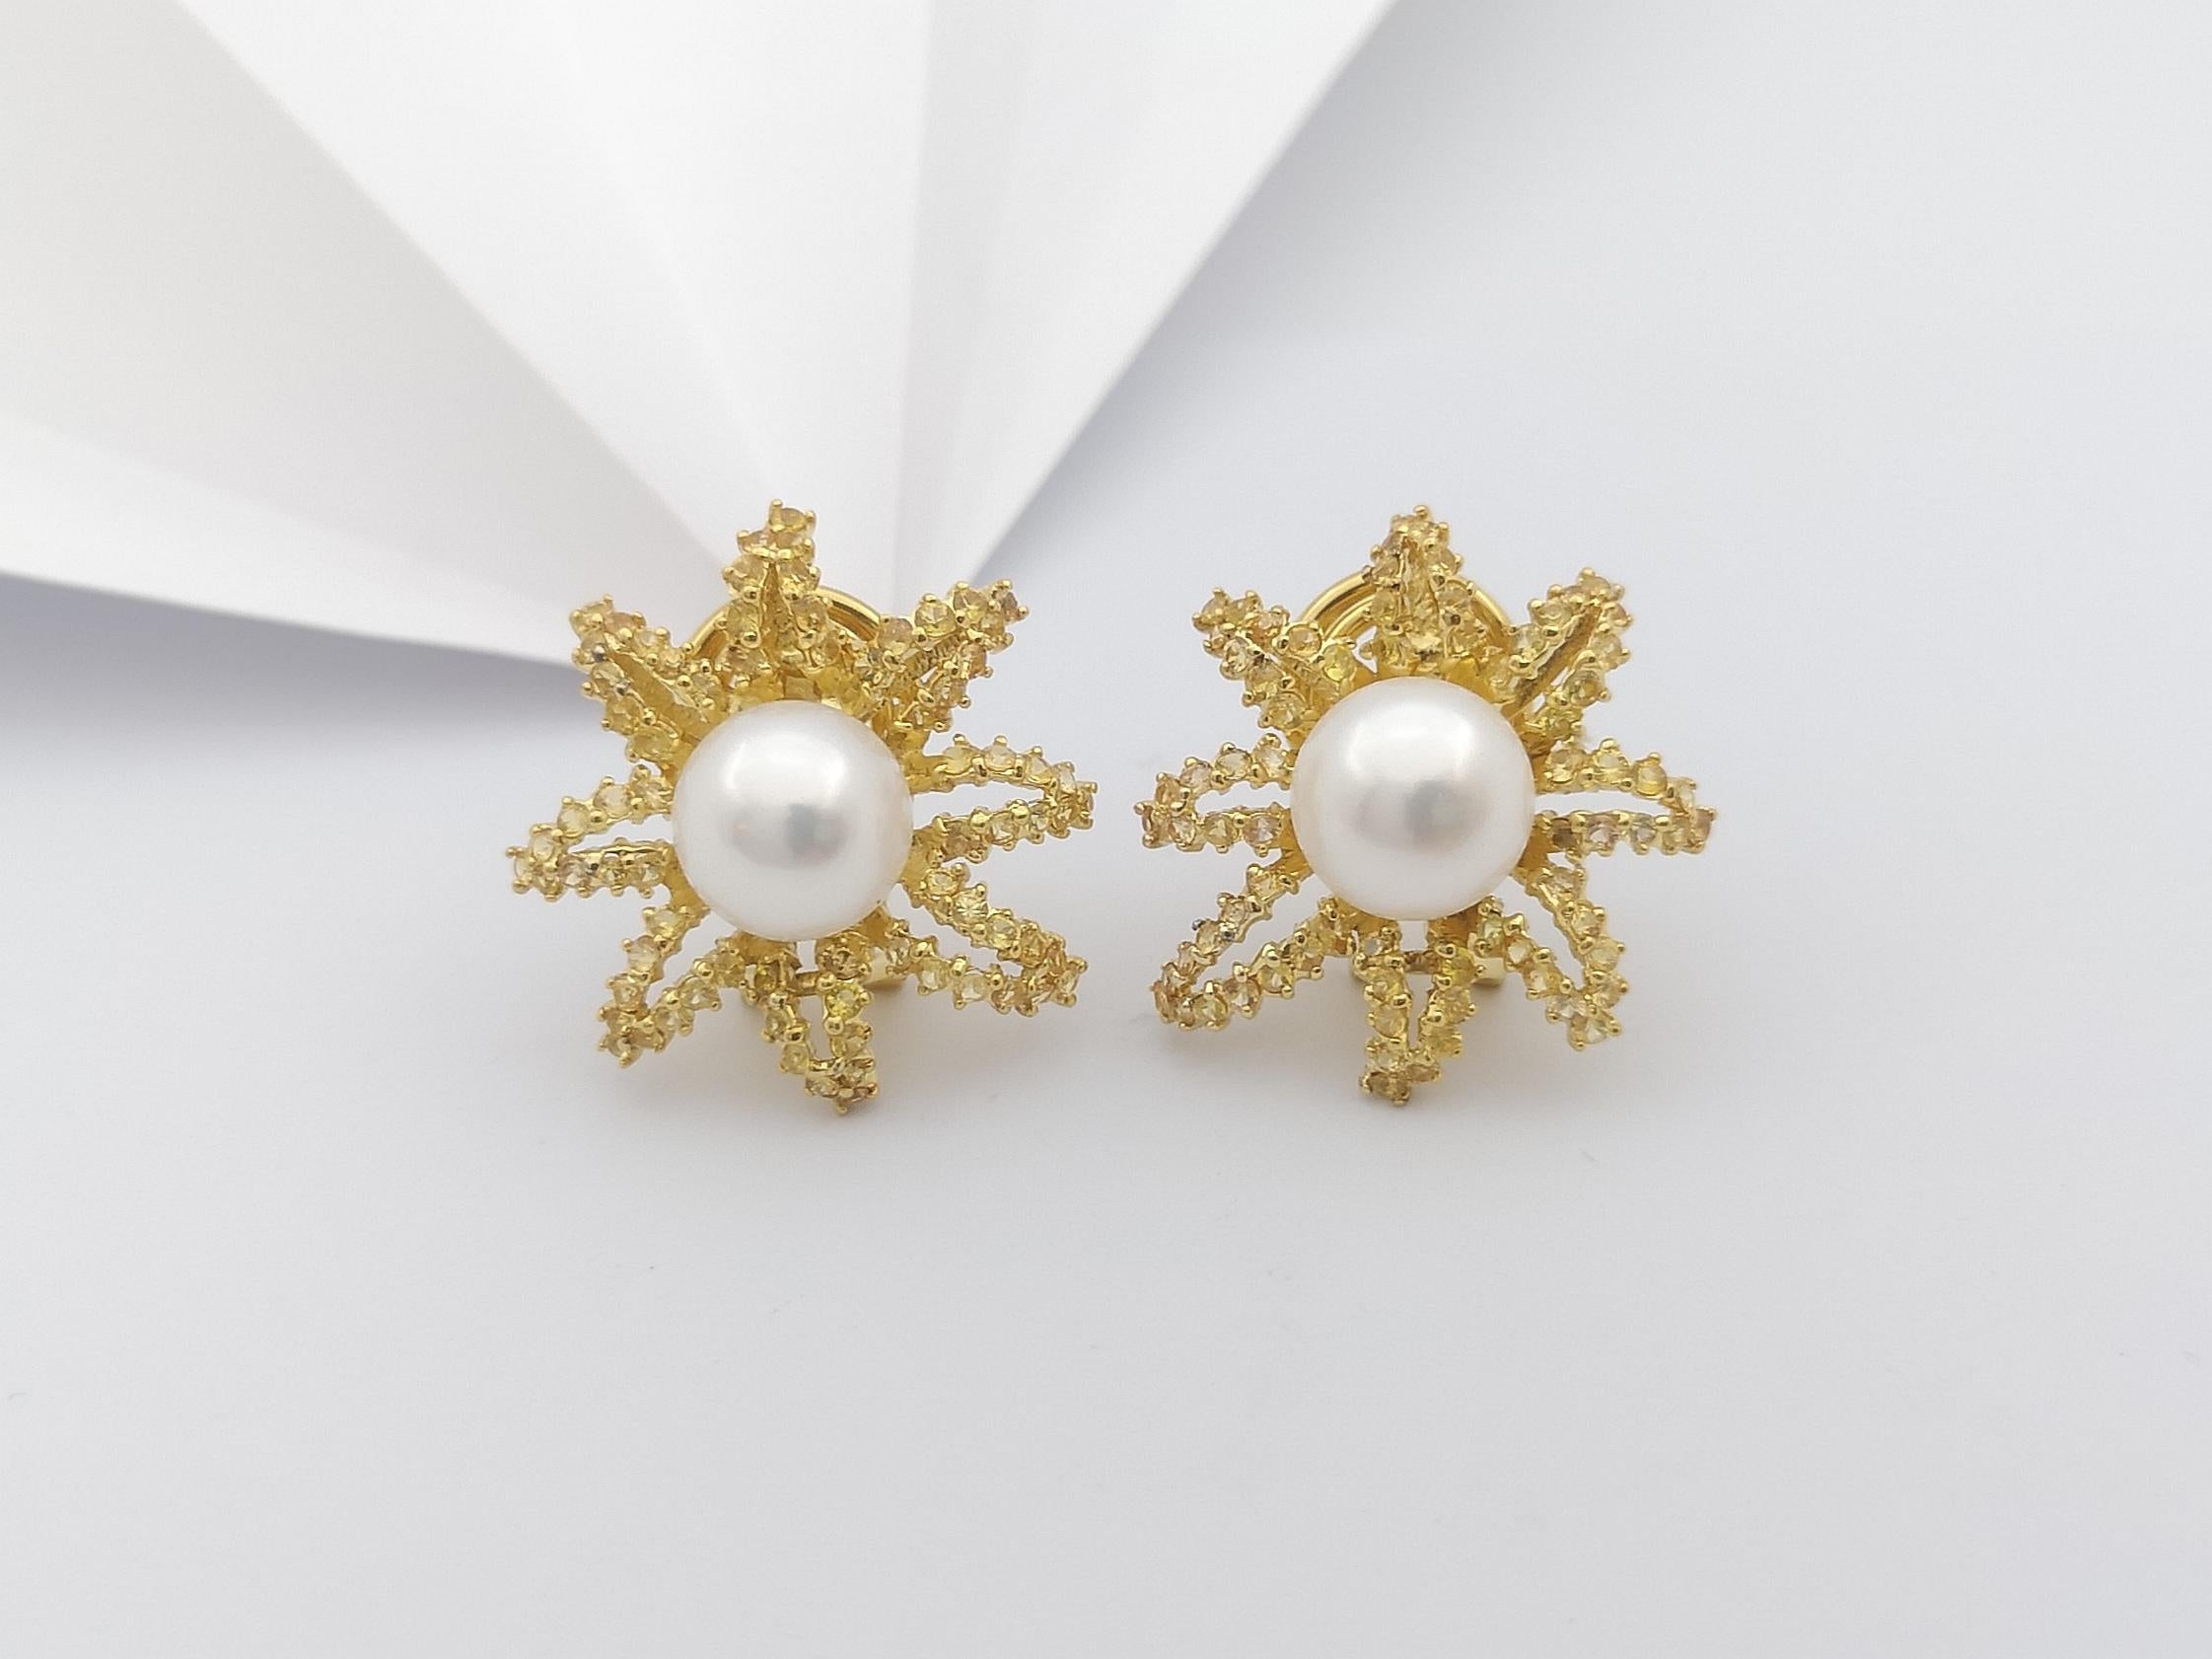 Brilliant Cut Fresh Water Pearl with Yellow Sapphire Earrings Set in 18 Karat Gold Settings For Sale